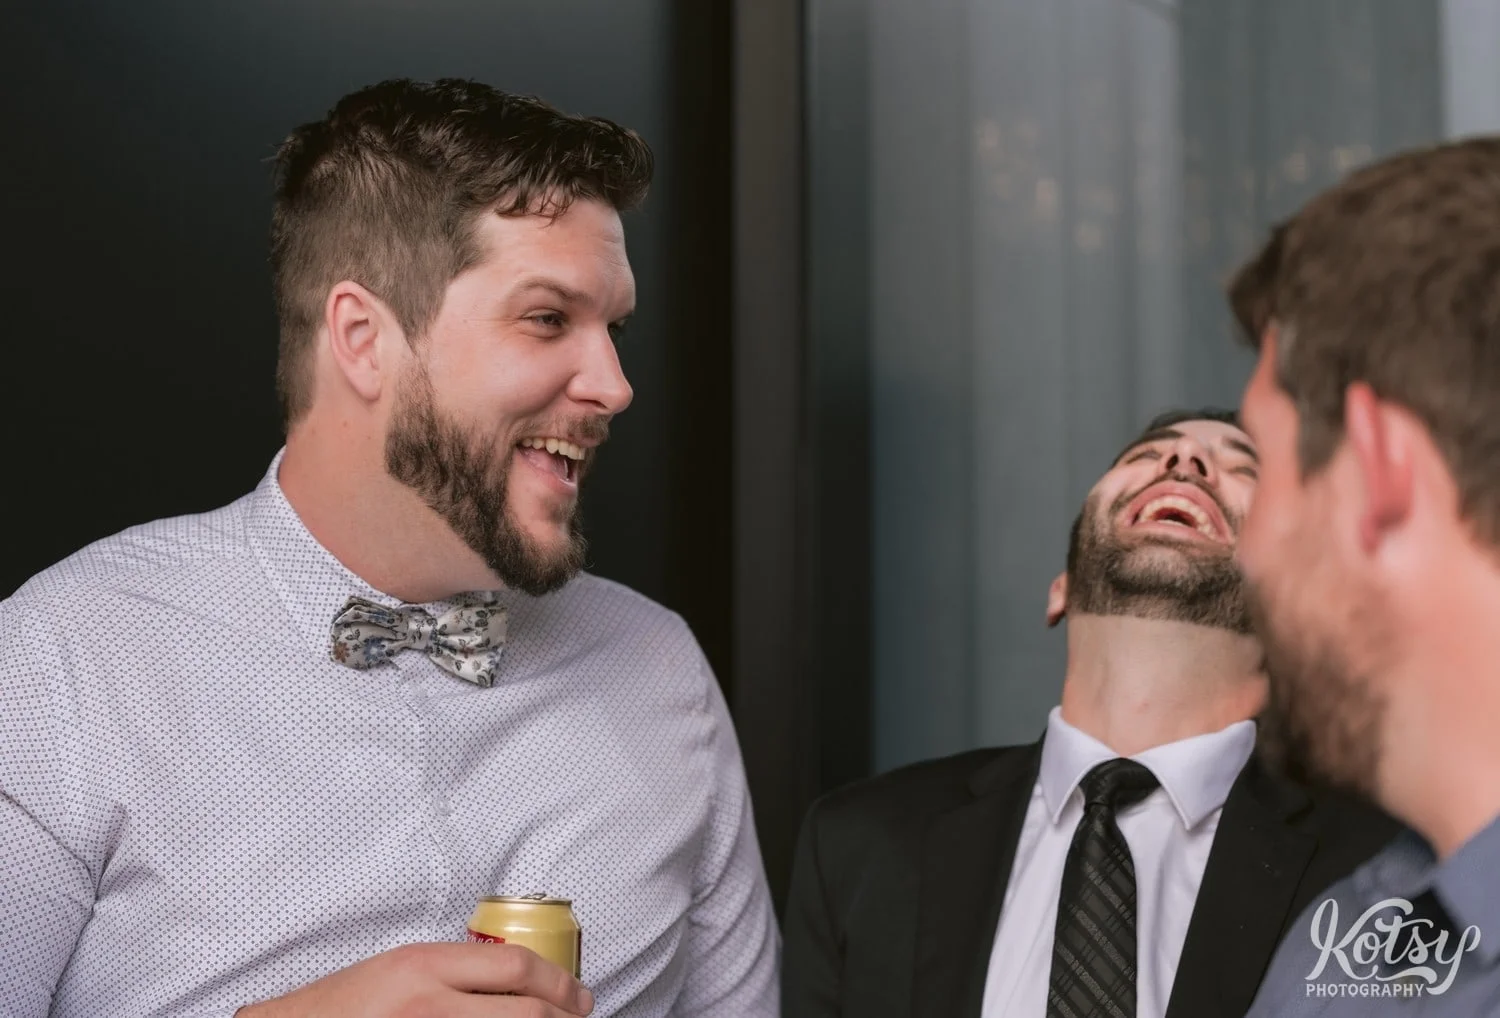 A man lets out a big laugh while head tilted back during a Village Loft wedding reception in Toronto, Canada